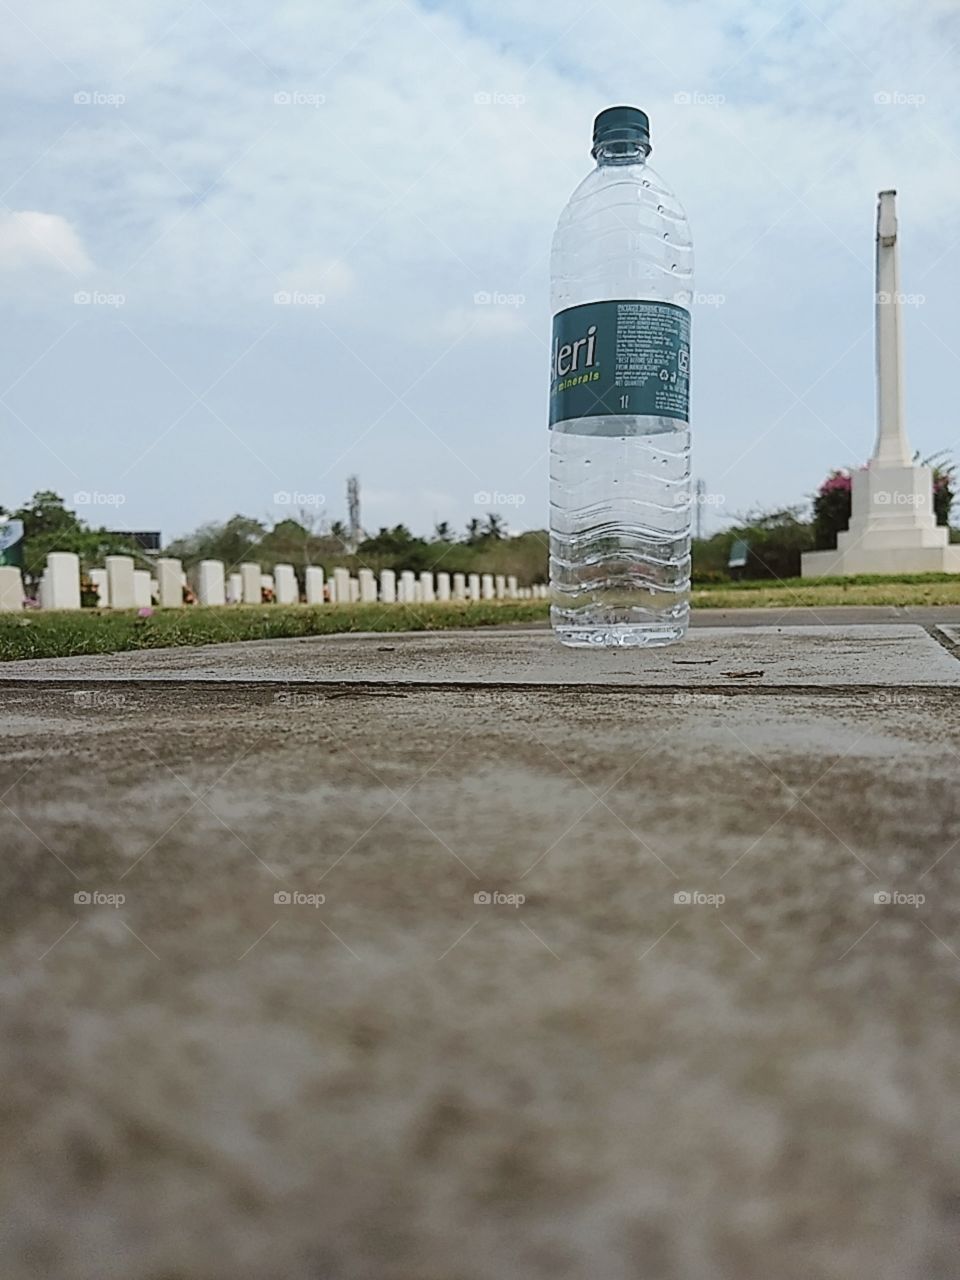 This empty bottle in between the gravyard reminds those who are under the grave.